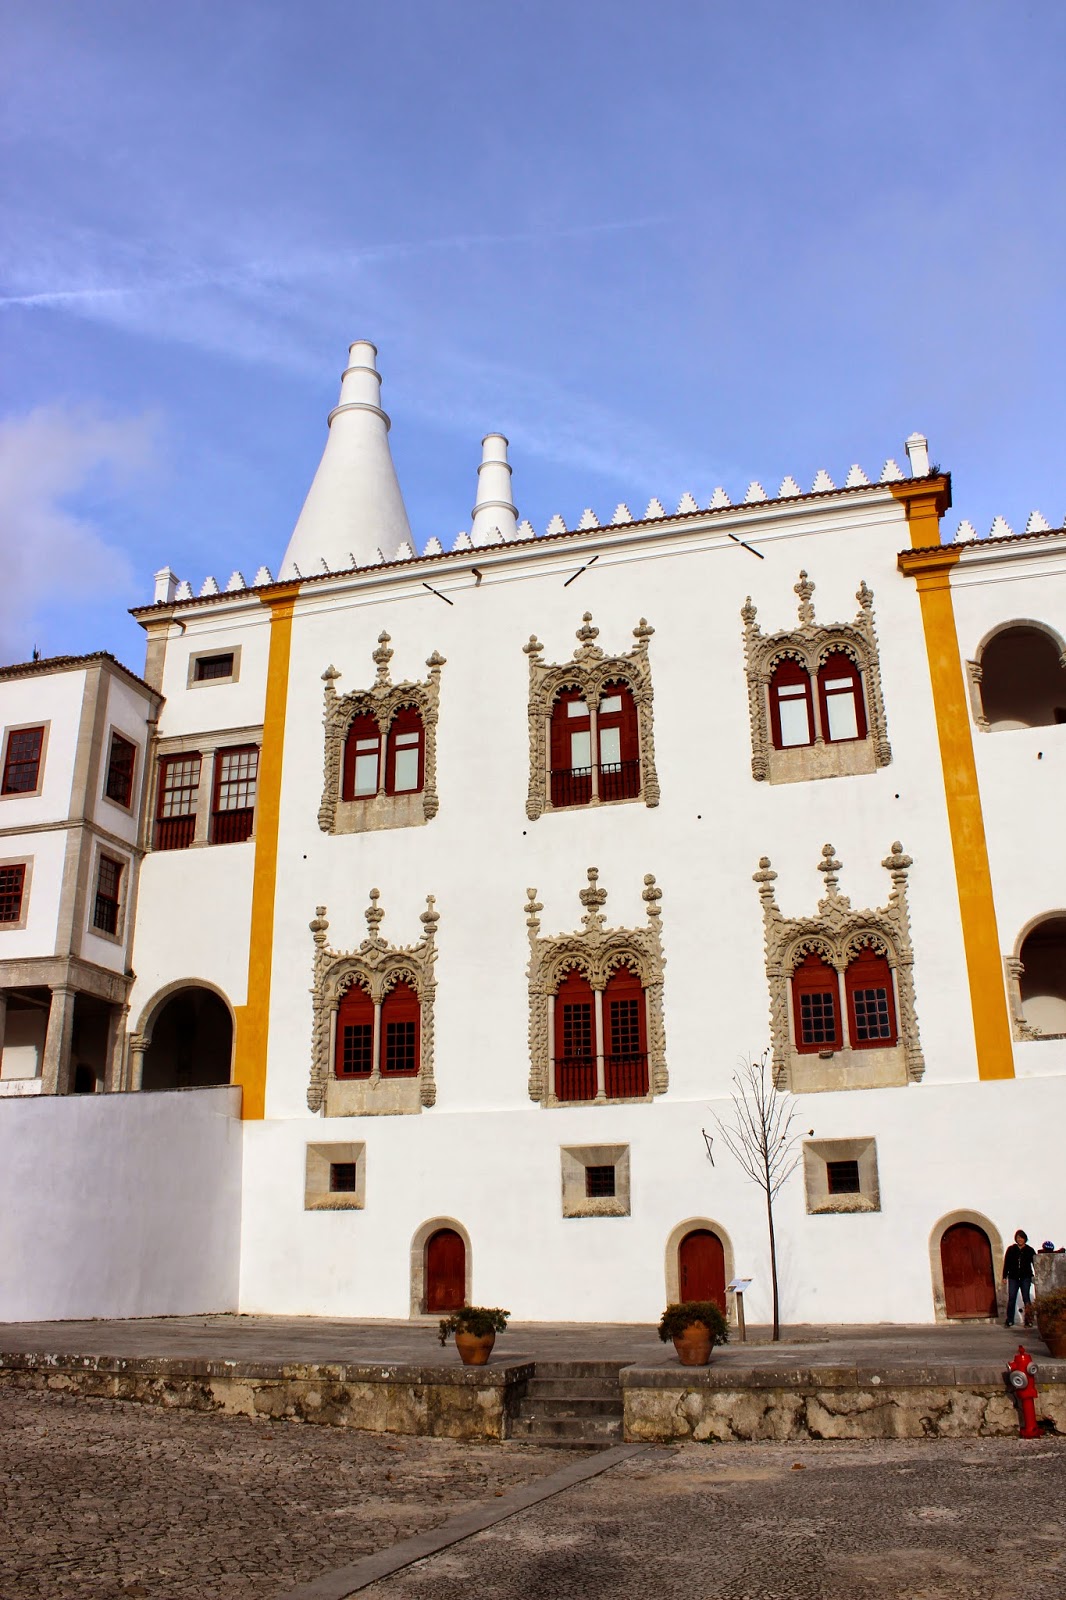 http://www.saucemagnusson.com/2015/03/the-portuguese-national-palace-in-sintra.html